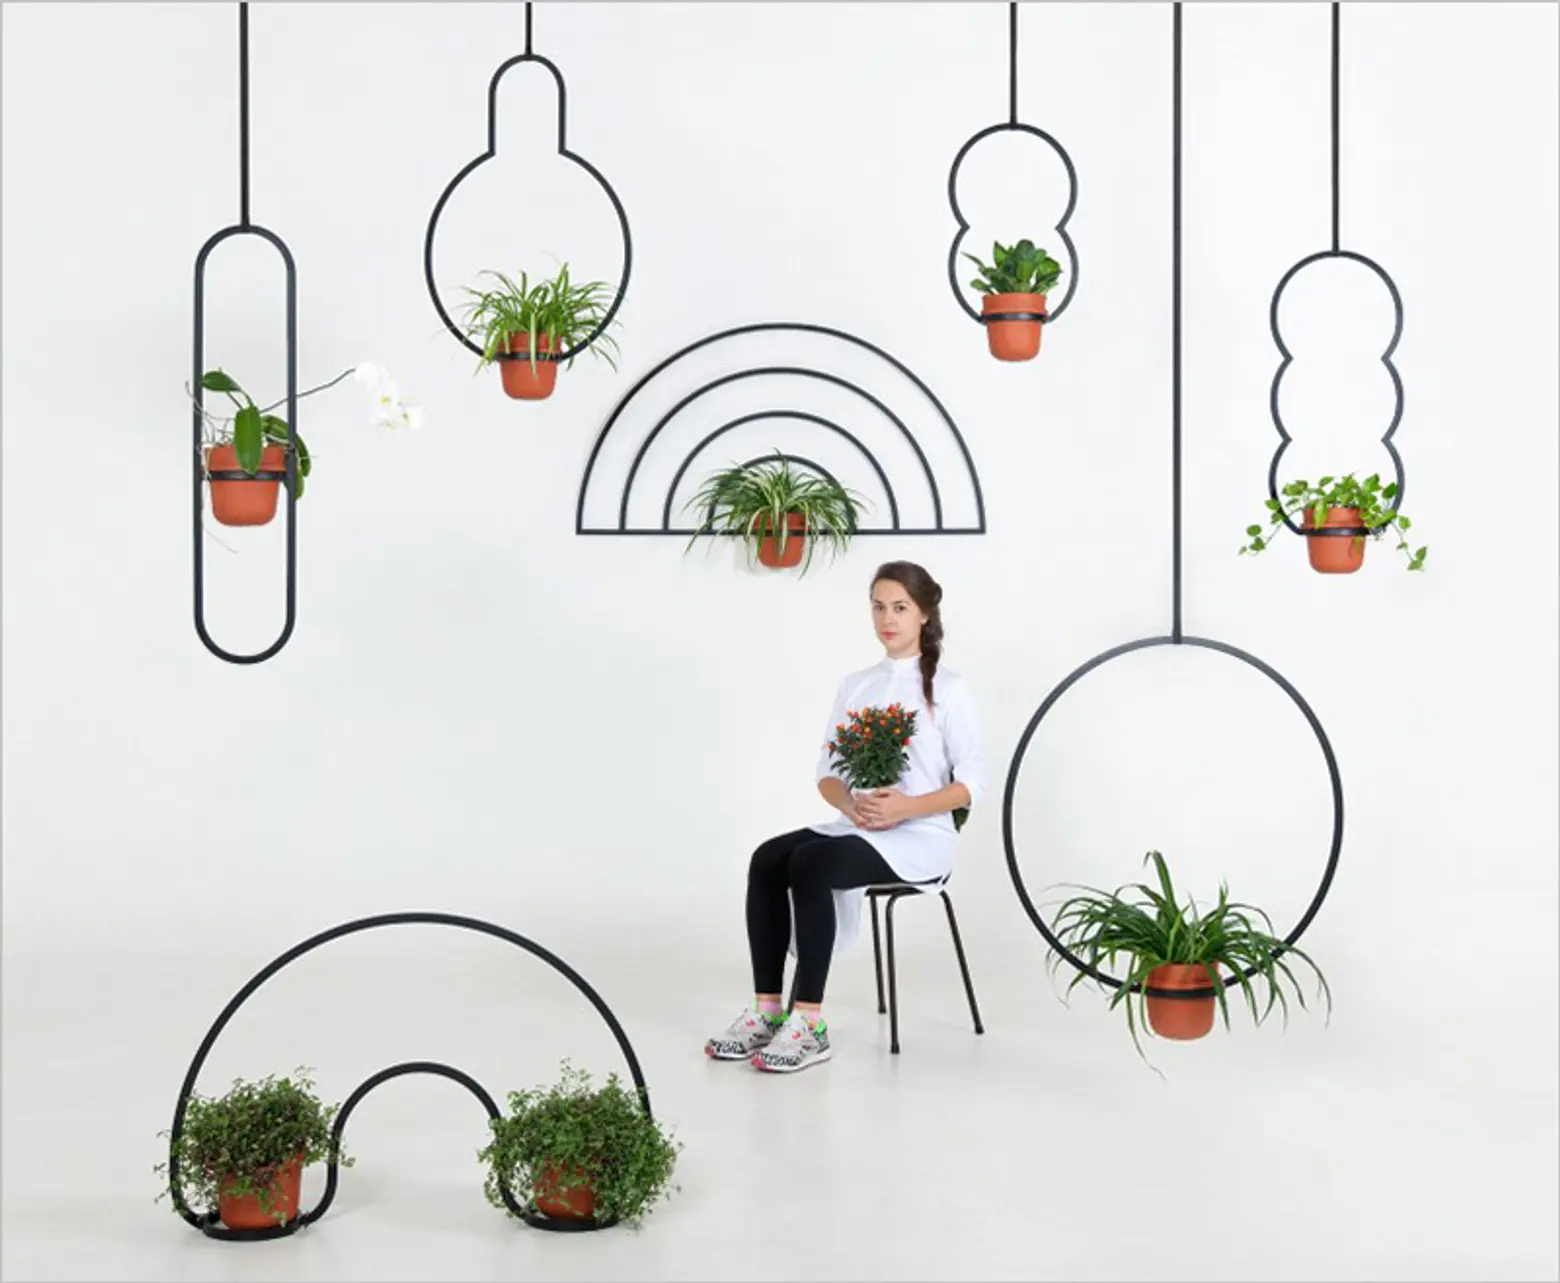 Kuiper Belt Planter’s Design Is Dedicated to Undiscovered Life Forms